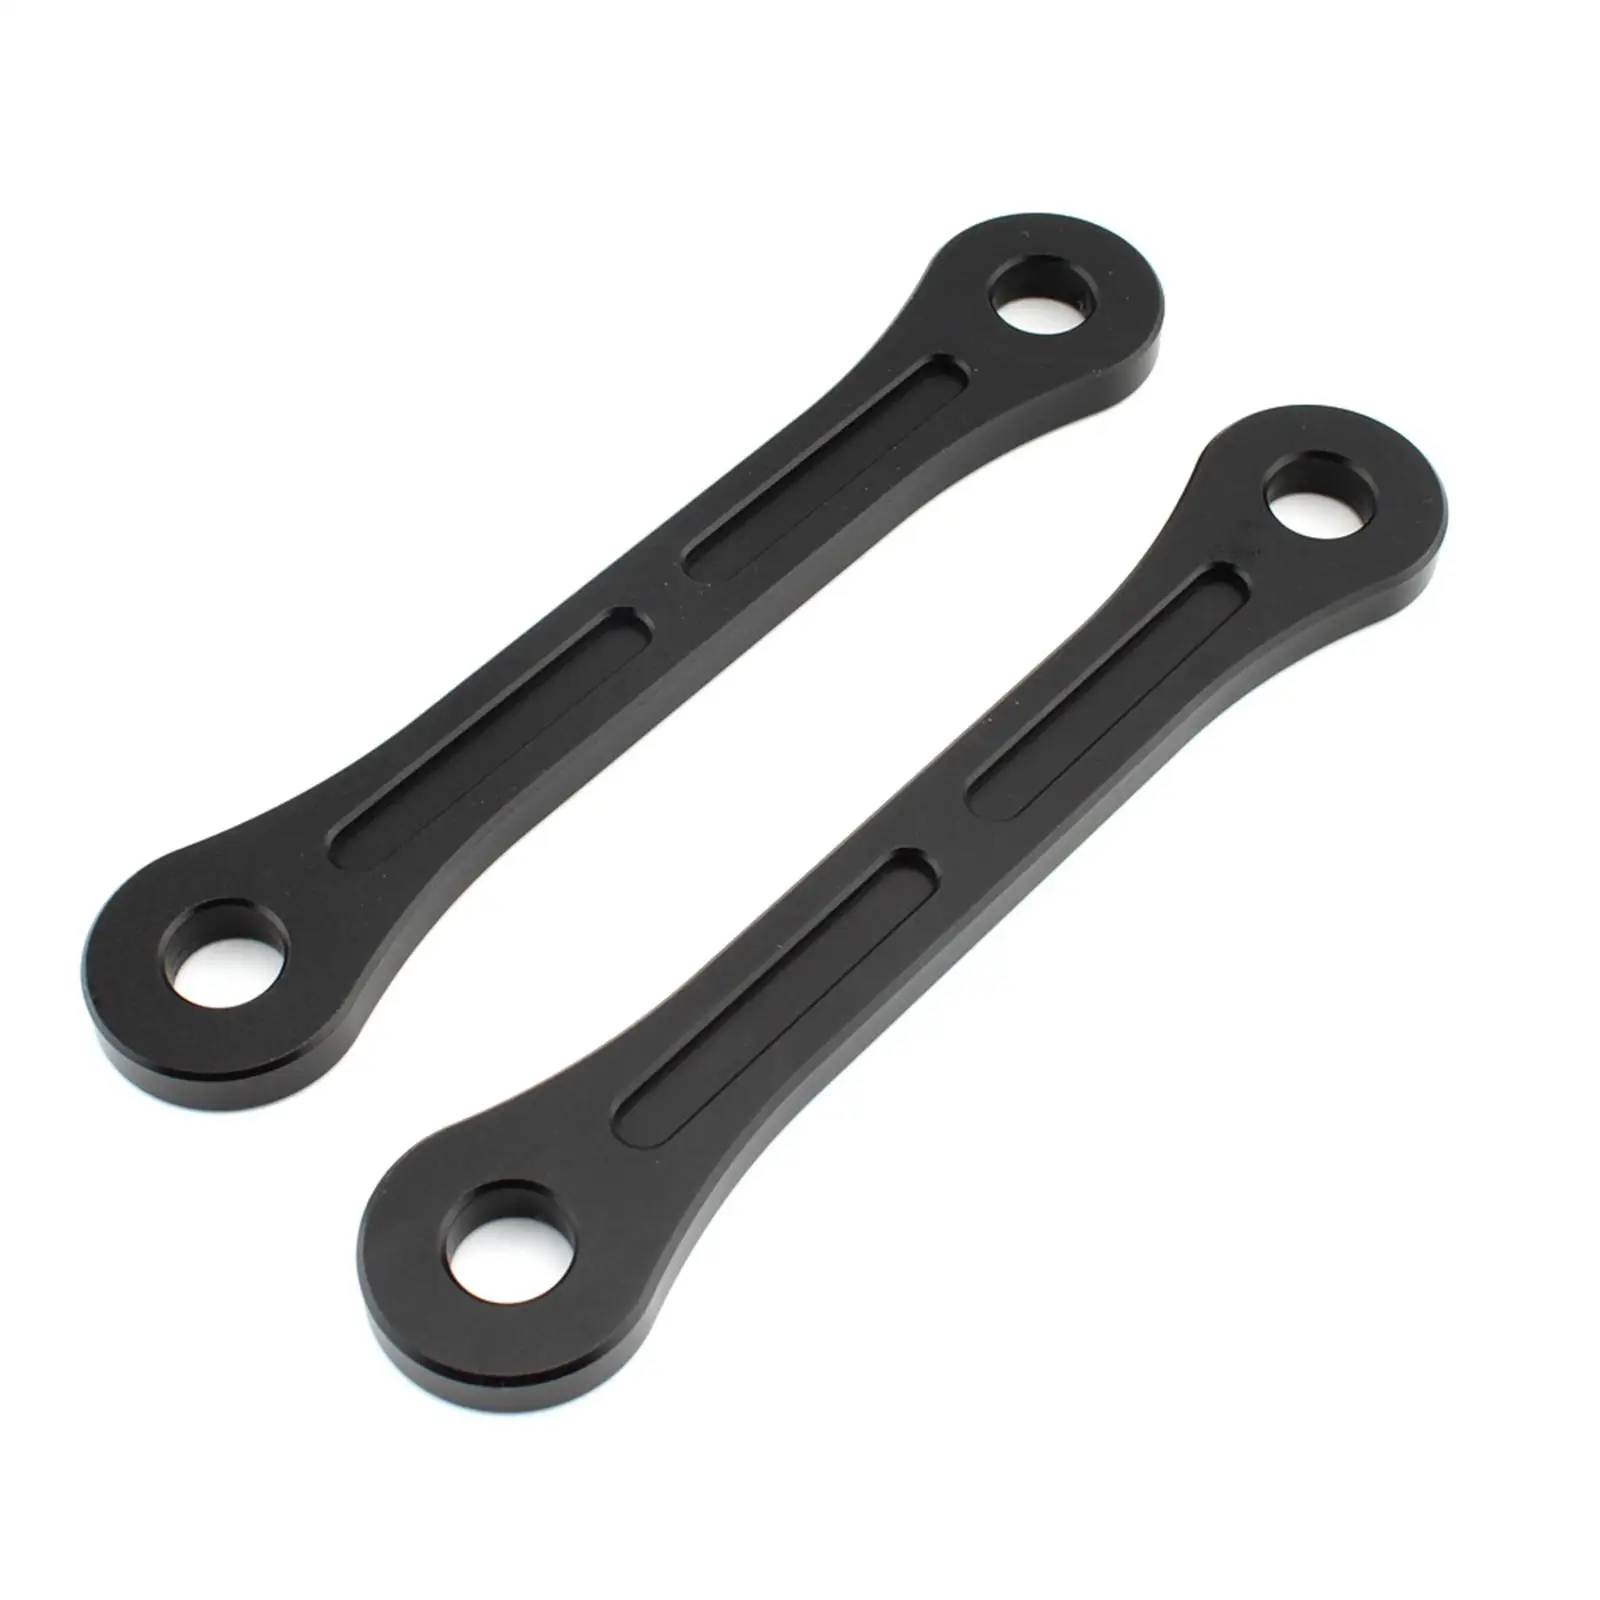 2 Pieces Motorcycle Lowering Drop Linkage ,Adjustable Accessories, Reinforced,